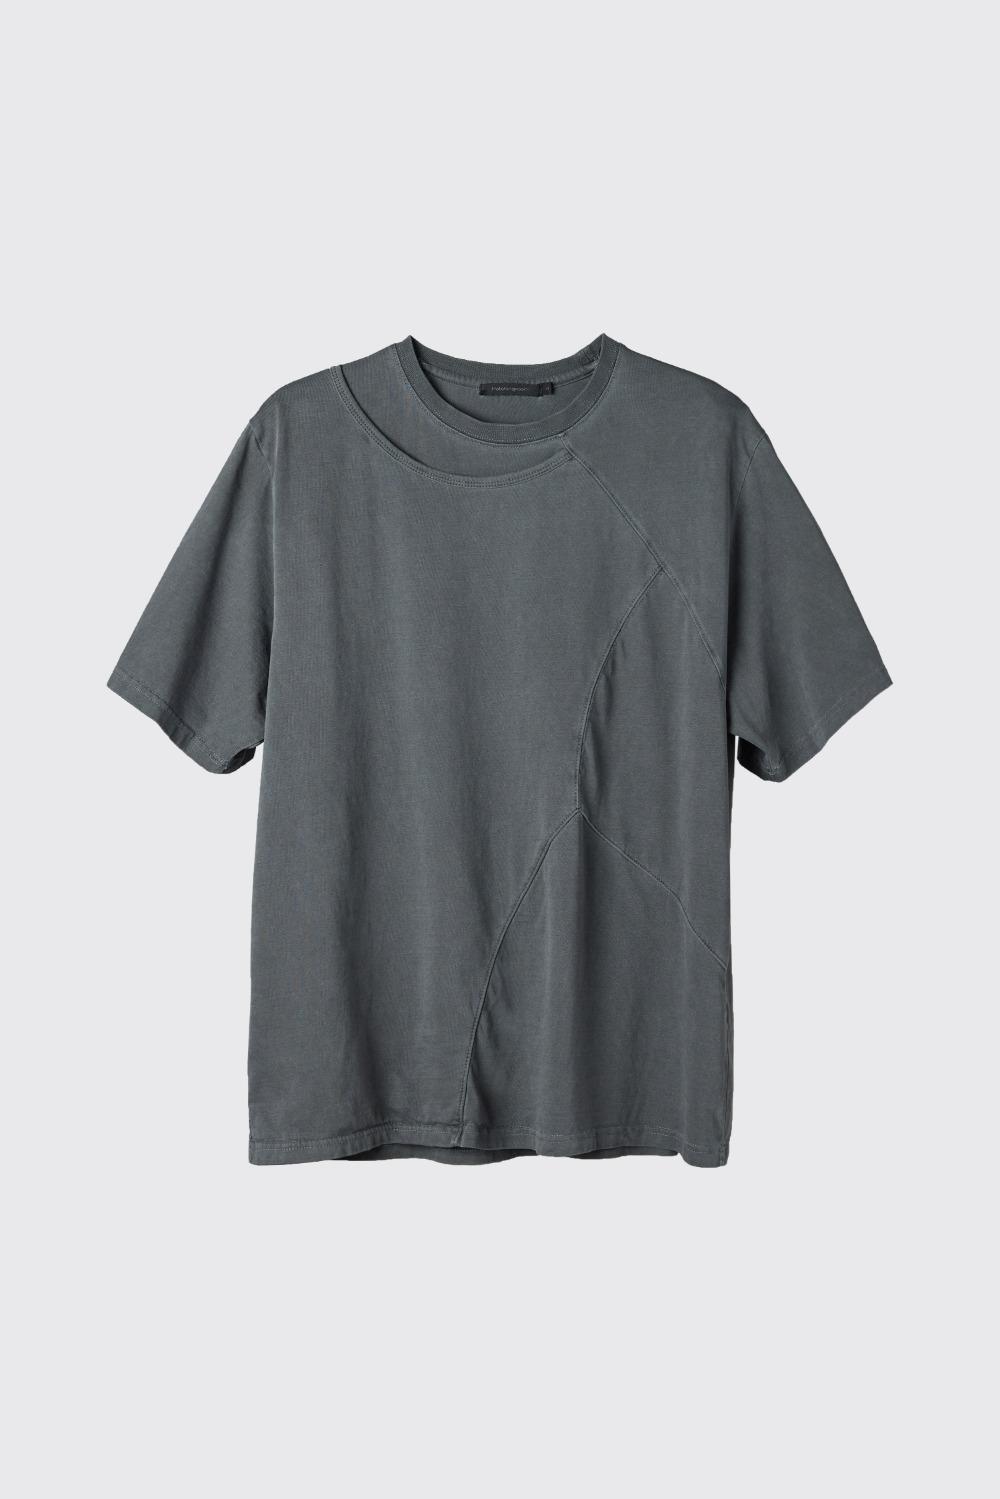 Dyed Gathering Tee V2 Charcoal